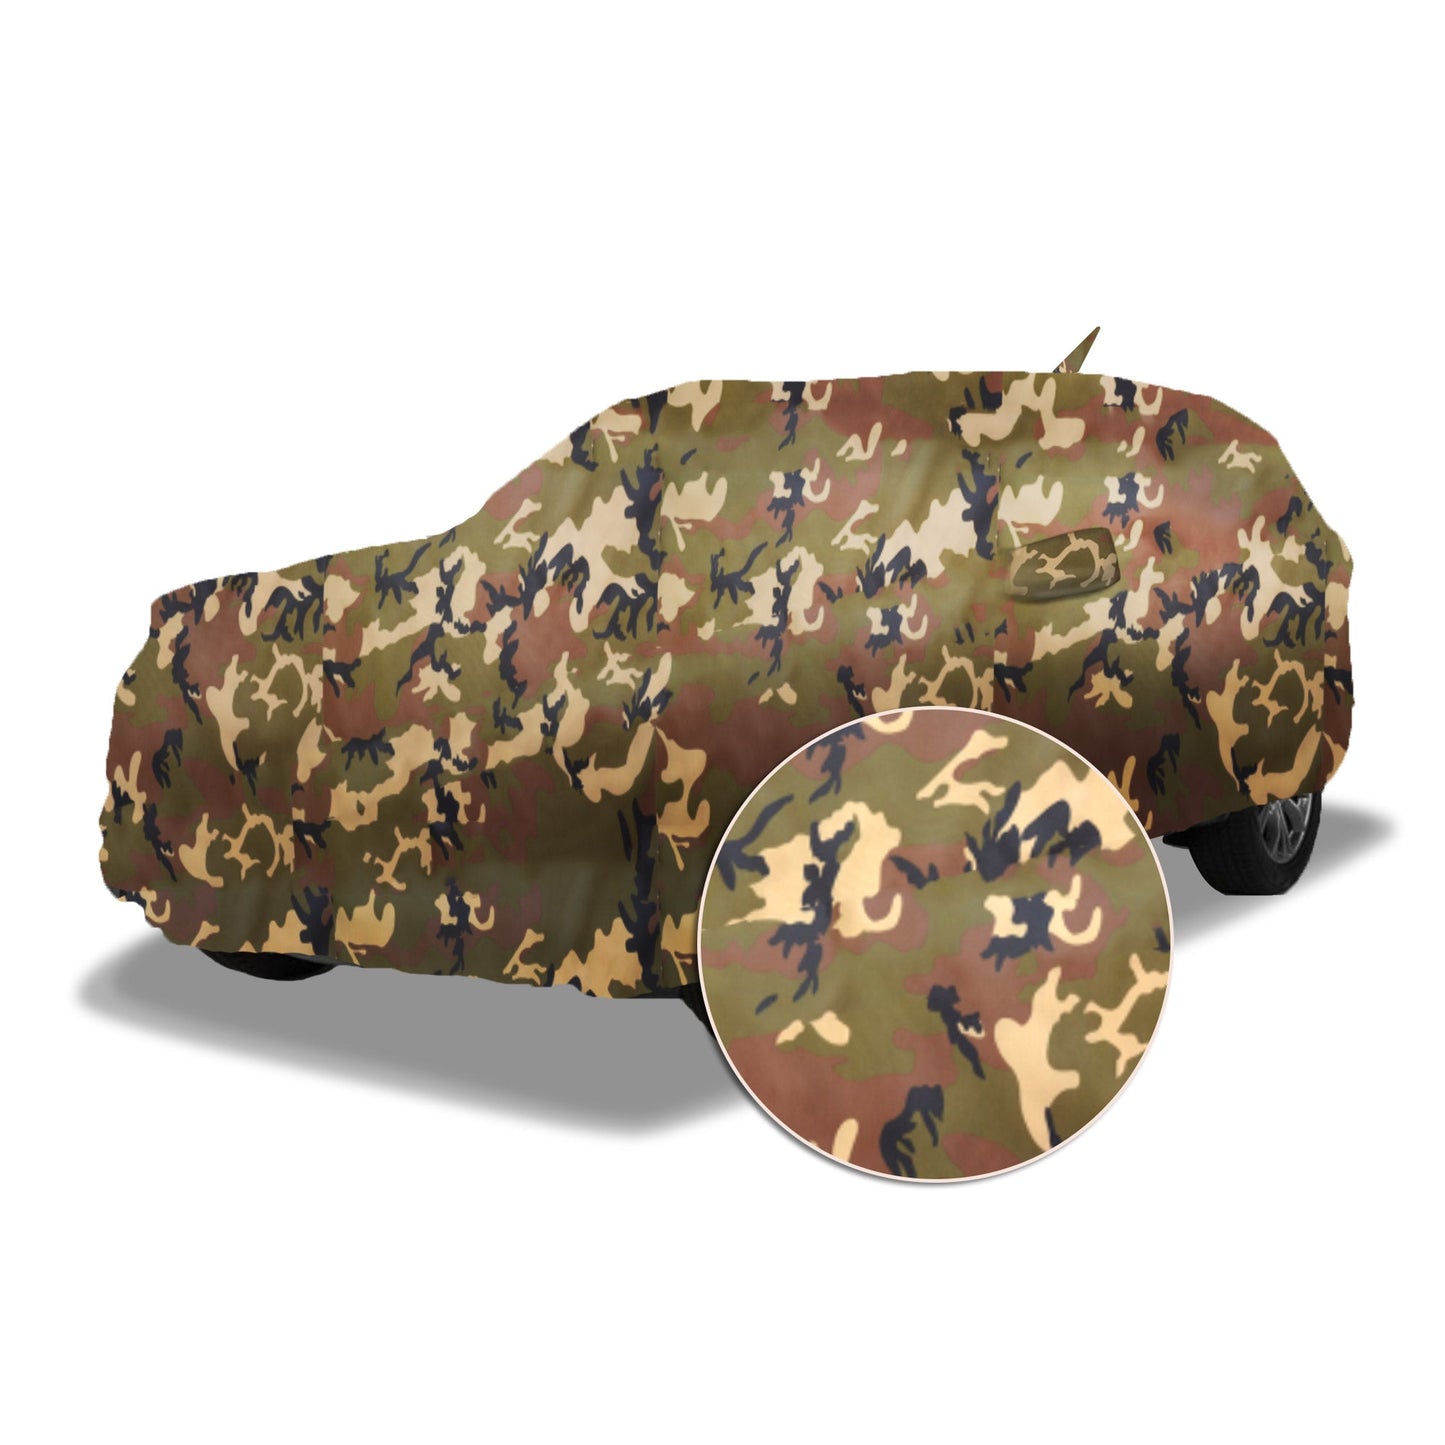 Ascot Mercedes-Benz GLS 2013-2020 Model Car Body Cover Extra Strong & Dust Proof Jungle Military Car Cover with UV Proof & Water-Resistant Coating